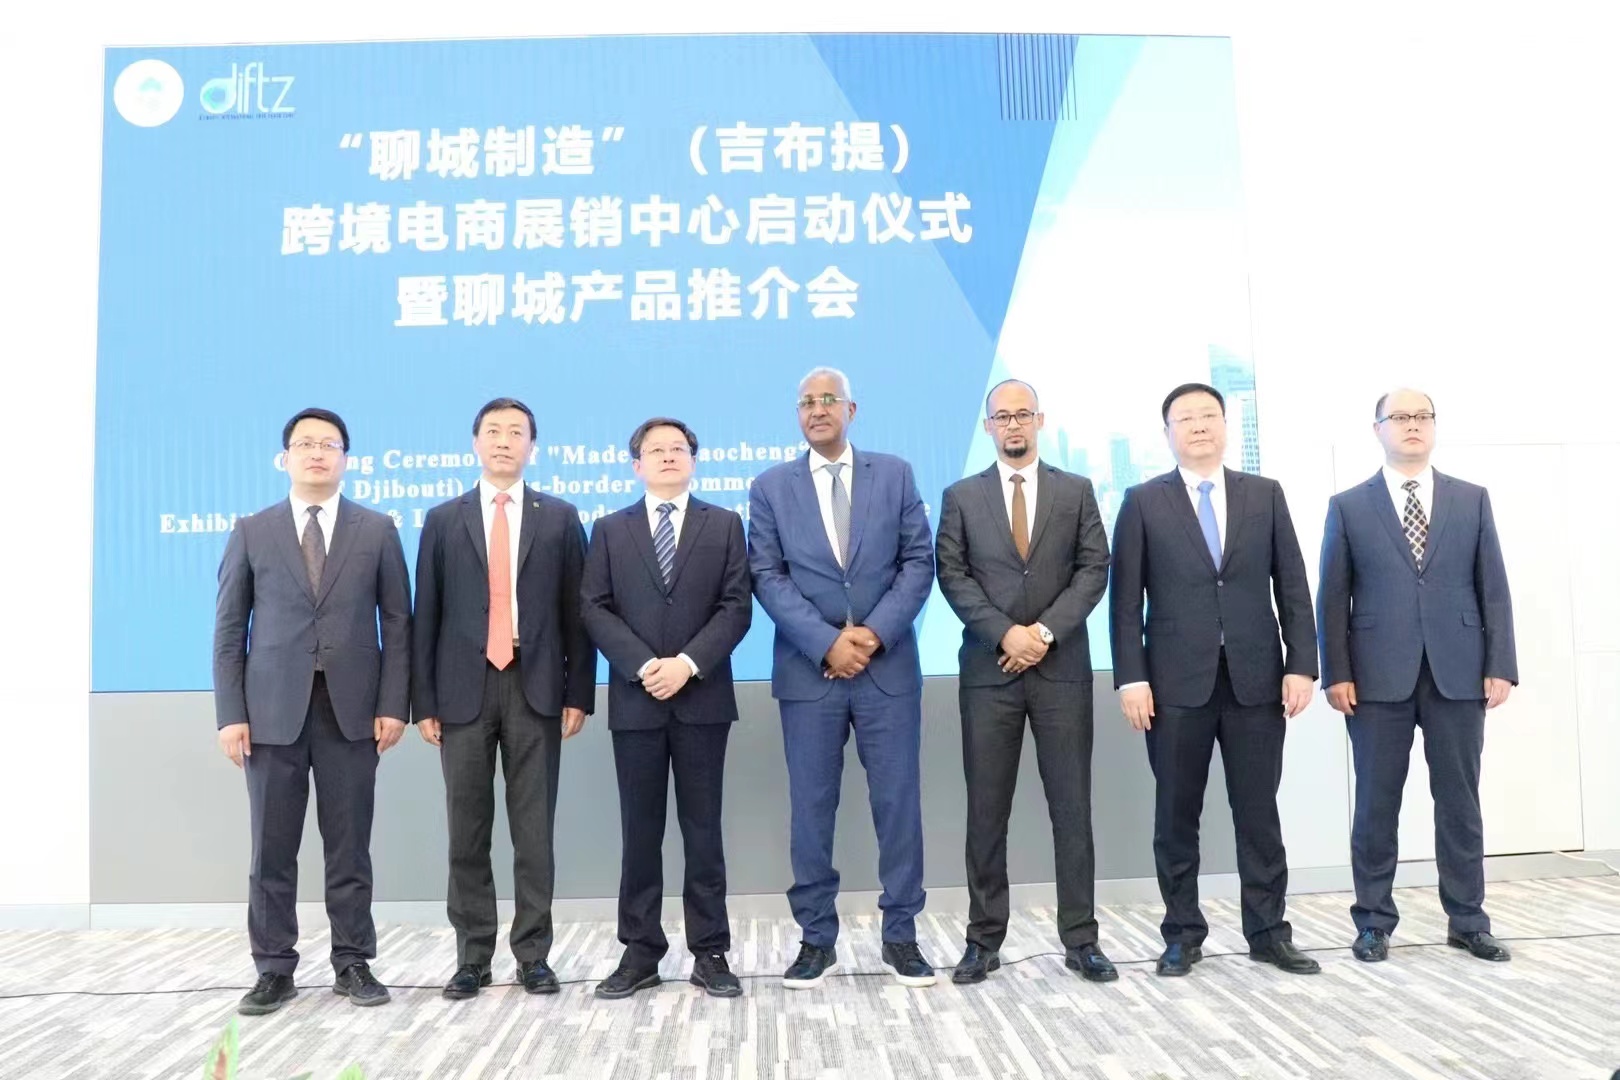 Liaocheng Manufacturing (Djibouti) cross-border e-commerce exhibition platform launch ceremony was a complete success, starting a new journey